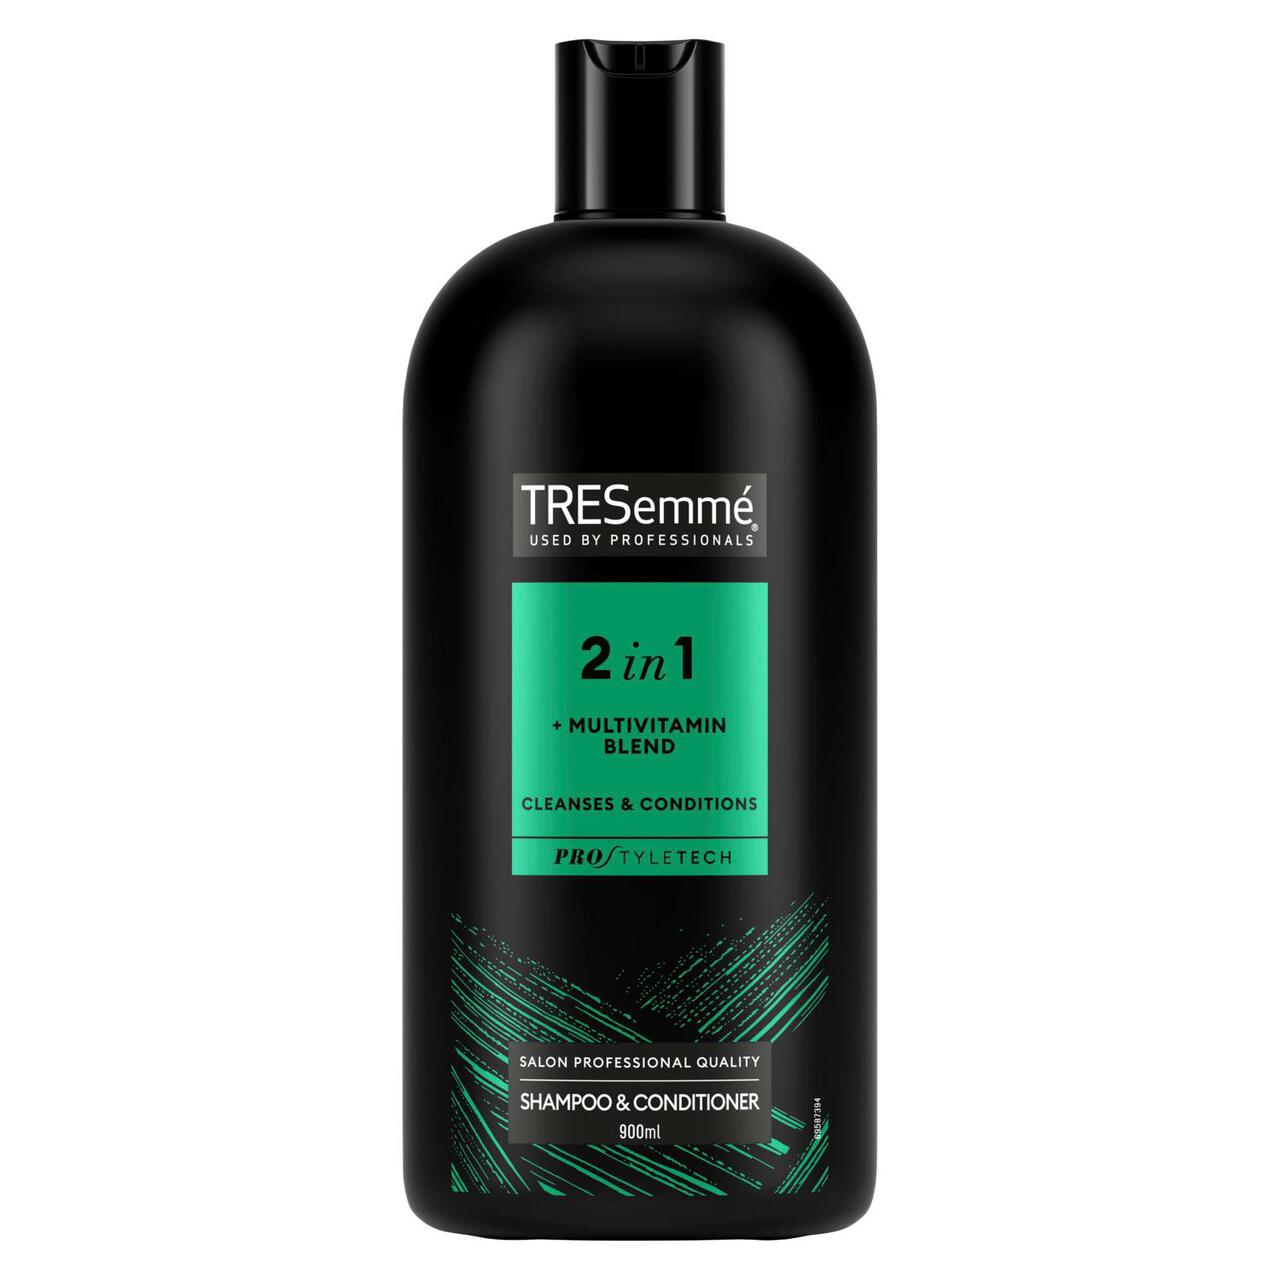 Tresemme 2 in 1 Cleanses & Conditions Shampoo & Conditioner 900ml